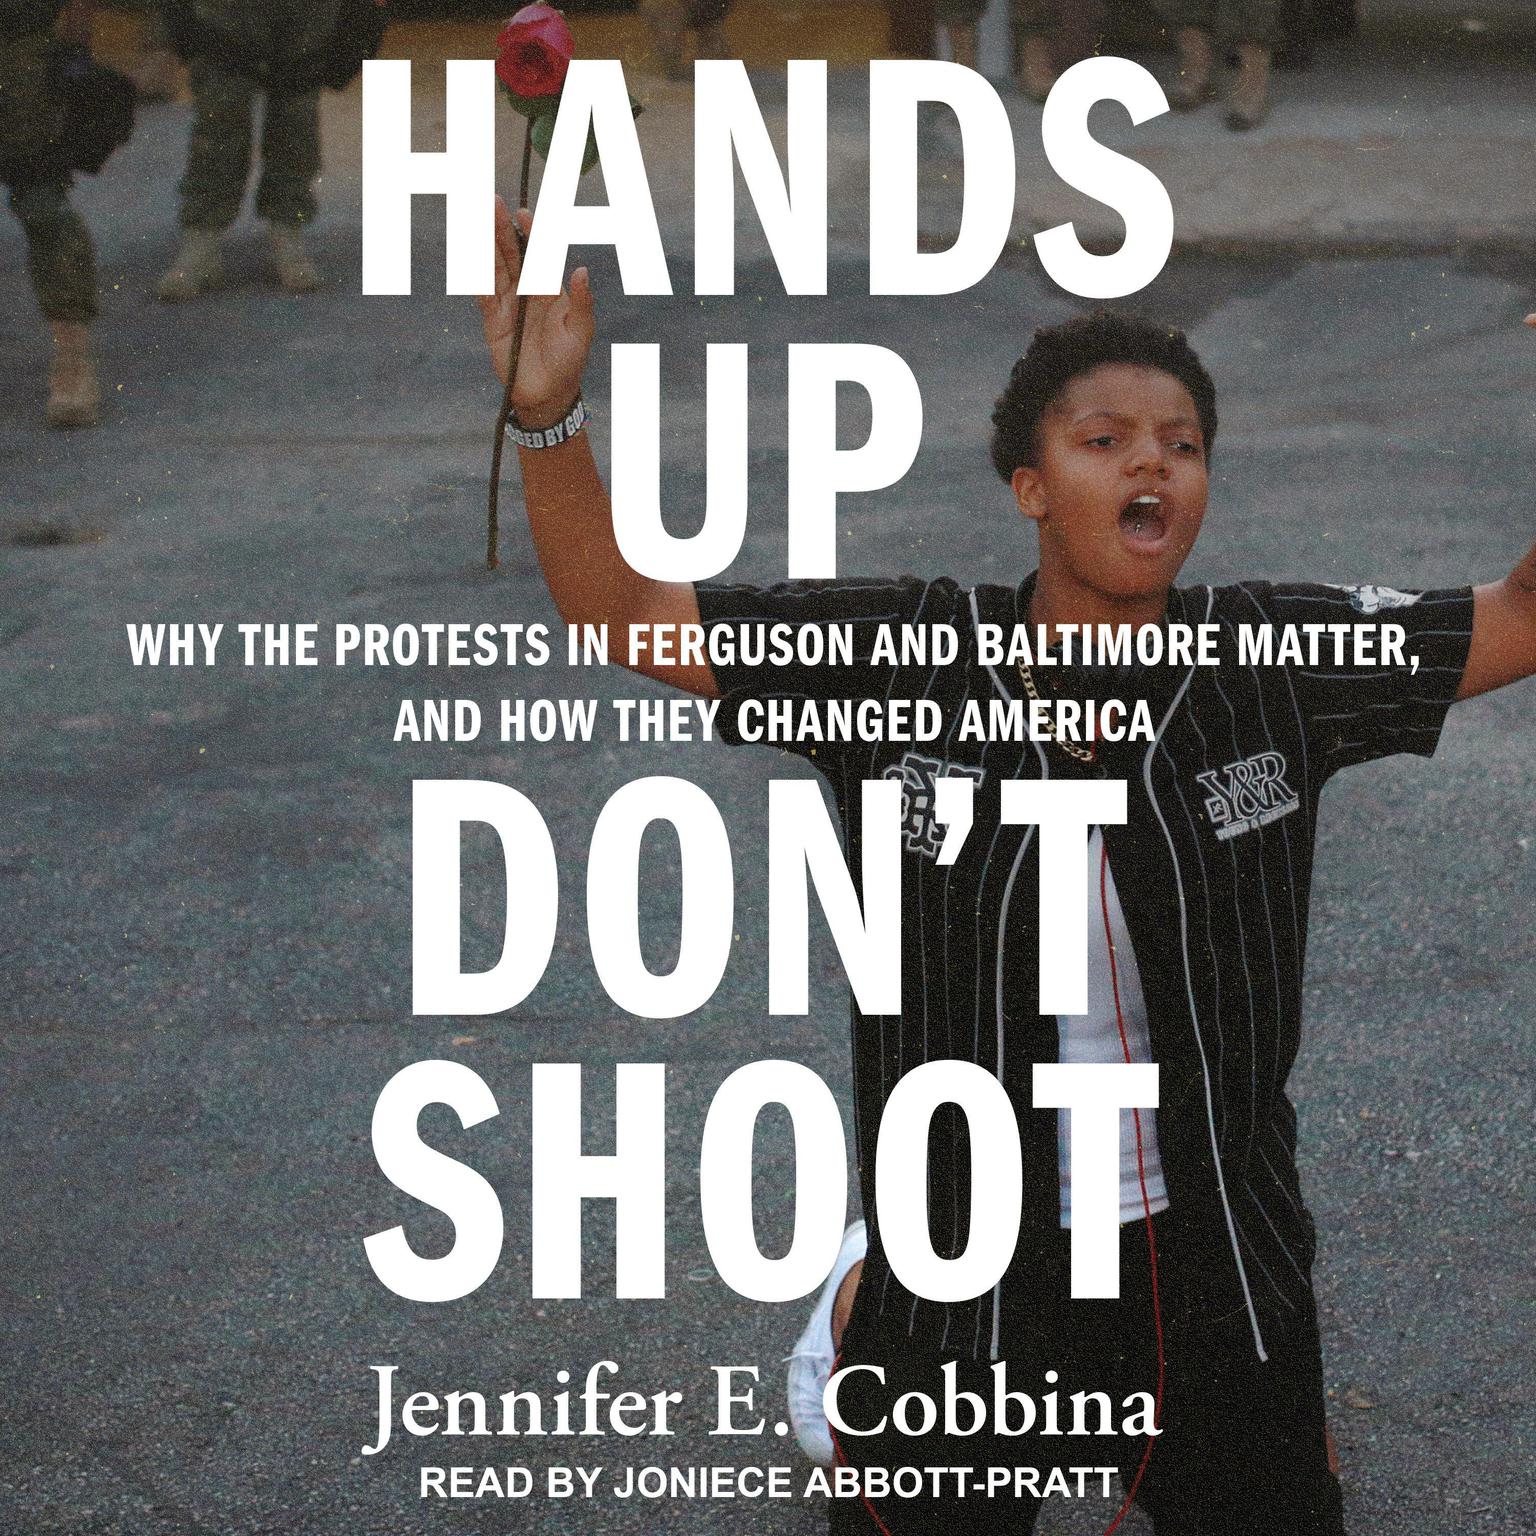 Hands Up, Dont Shoot: Why the Protests in Ferguson and Baltimore Matter, and How They Changed America Audiobook, by Jennifer E. Cobbina